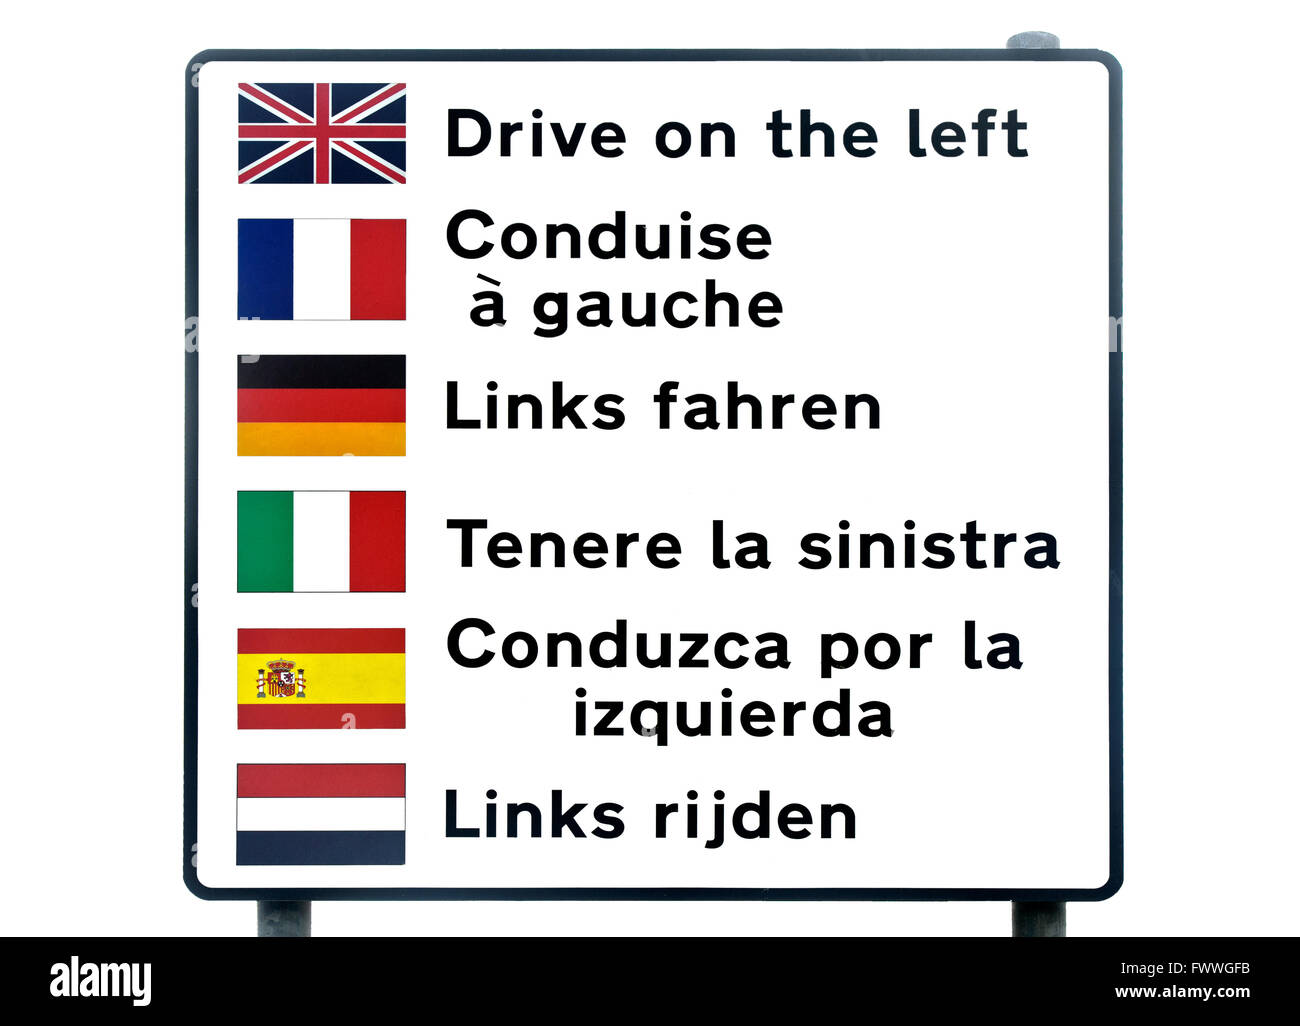 Multilingual warning sign for tourists lettering Drive on the left, Scotland, United Kingdom Stock Photo